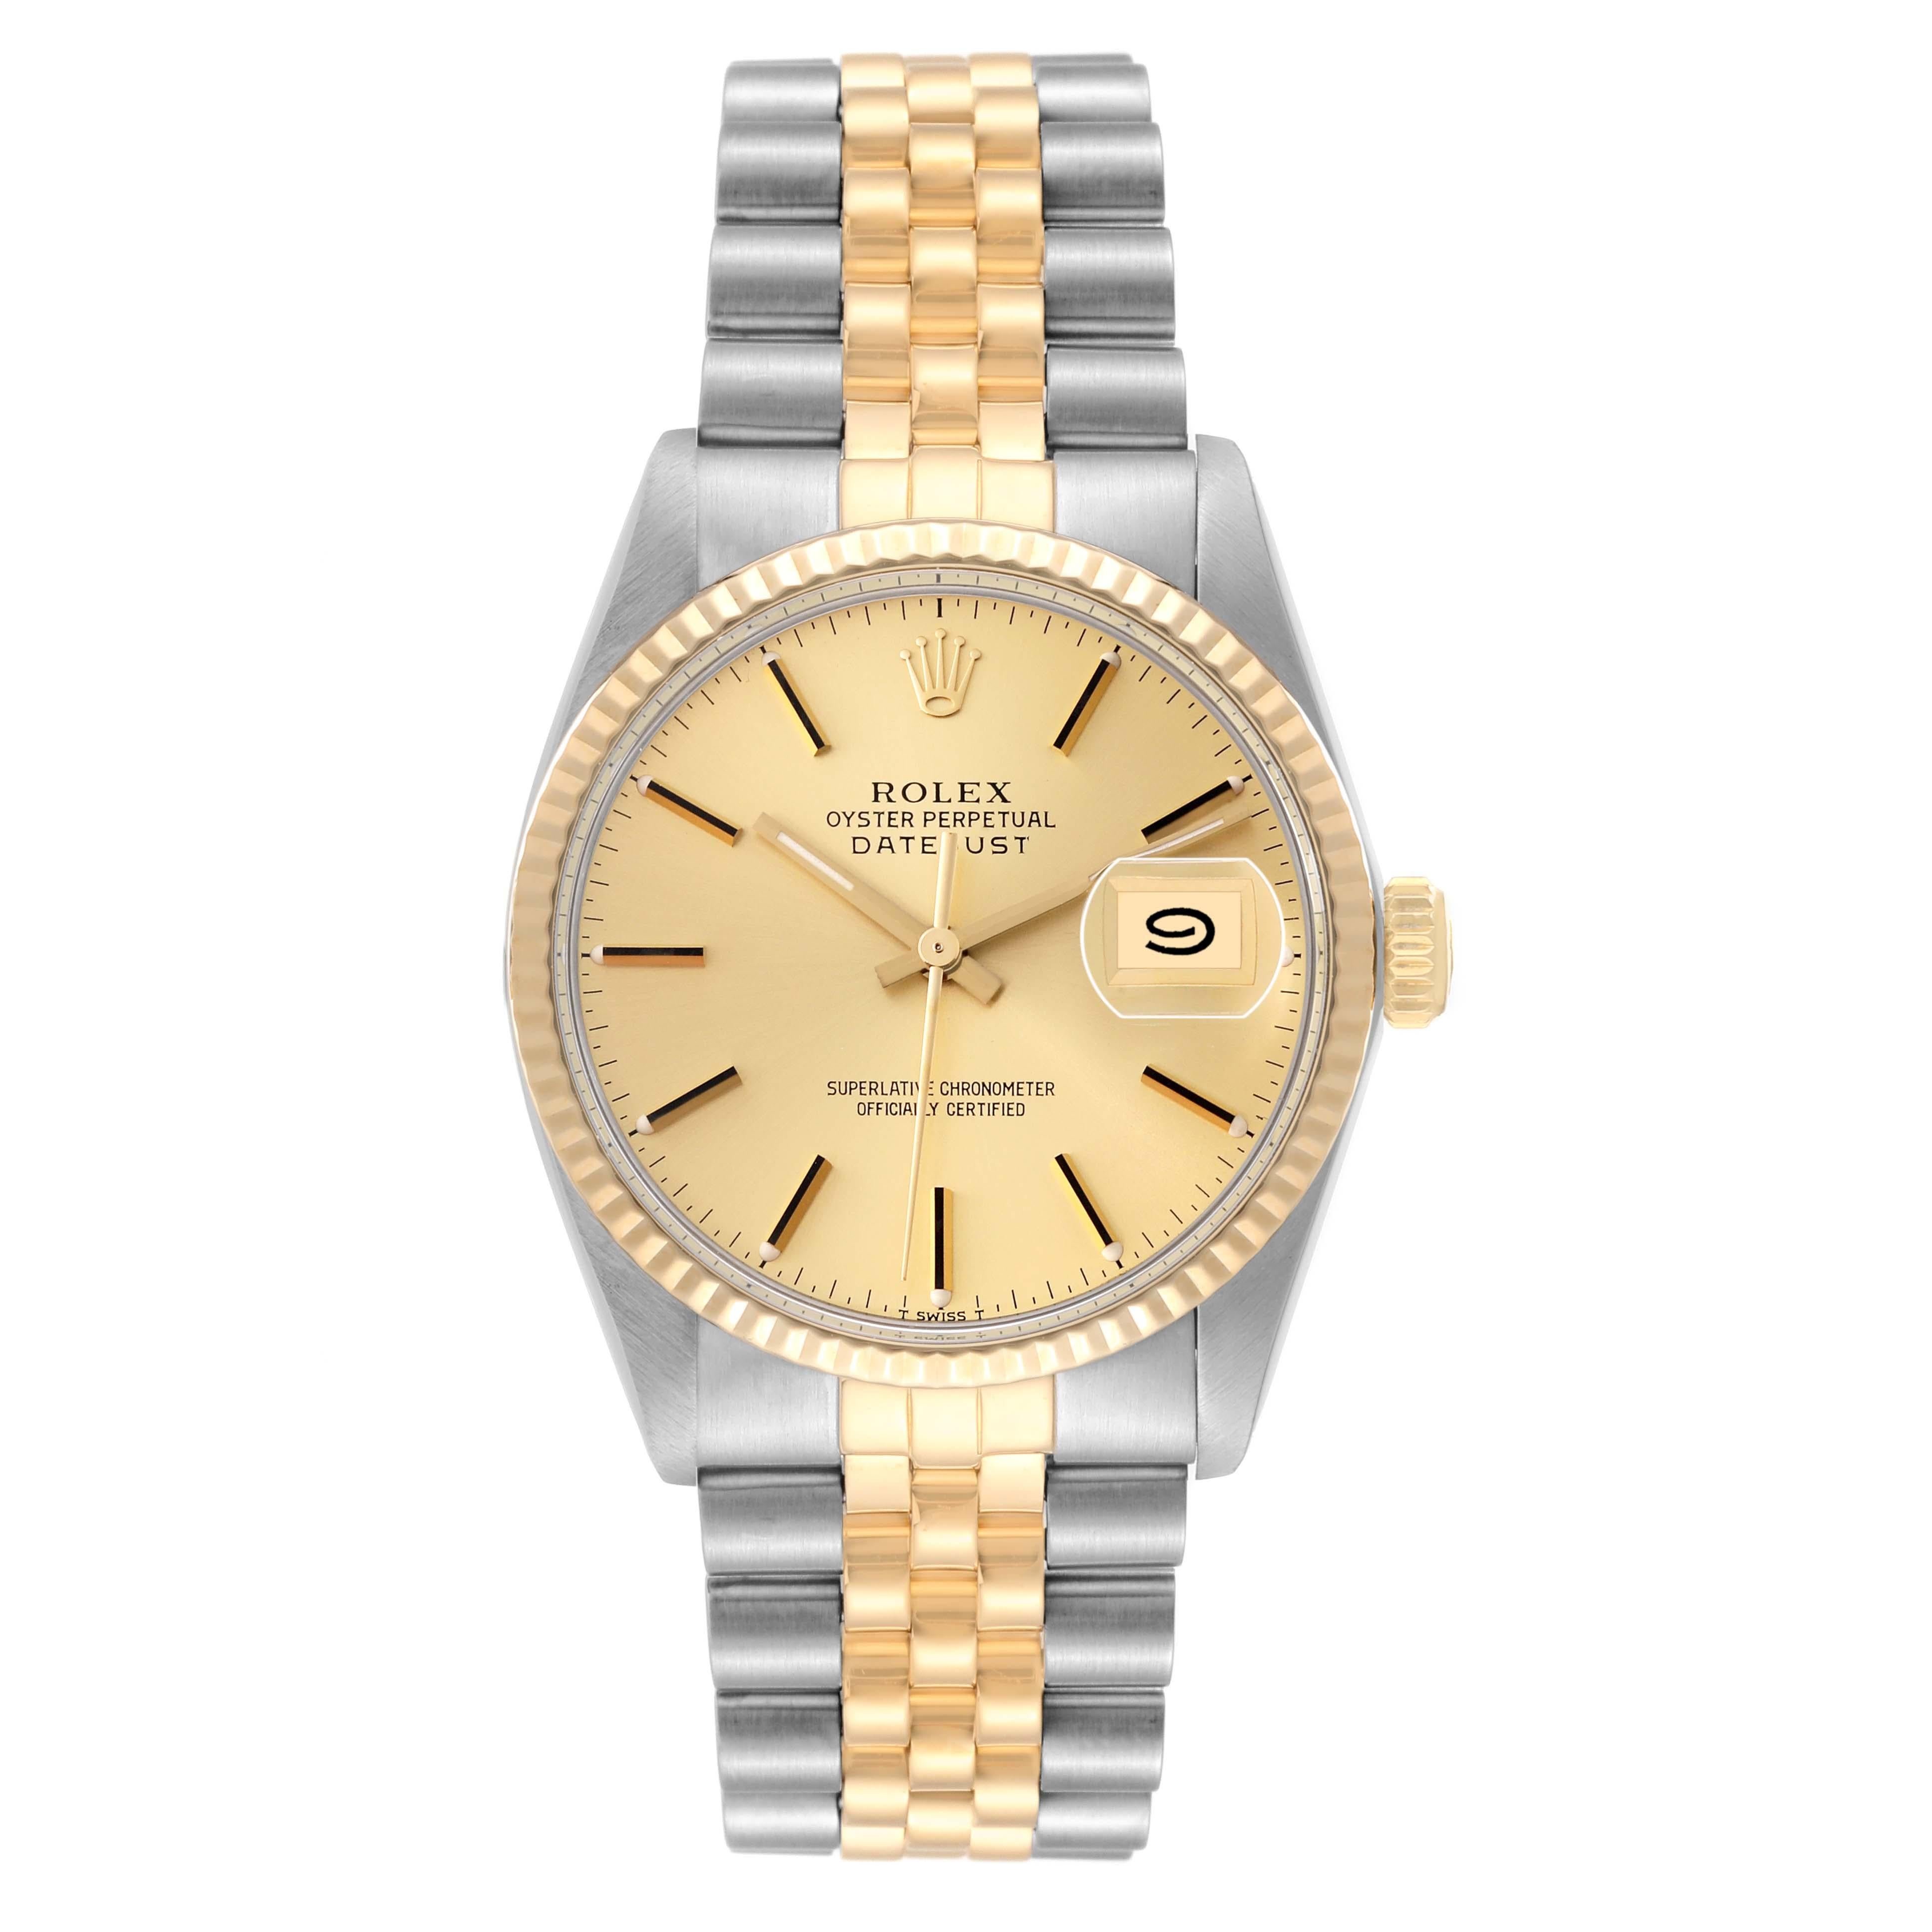 Rolex Datejust Steel Yellow Gold Vintage Mens Watch 16013. Officially certified chronometer automatic self-winding movement. Stainless steel and 18k yellow gold oyster case 36.0 mm in diameter. Rolex logo on an 18k yellow gold crown. 18k yellow gold